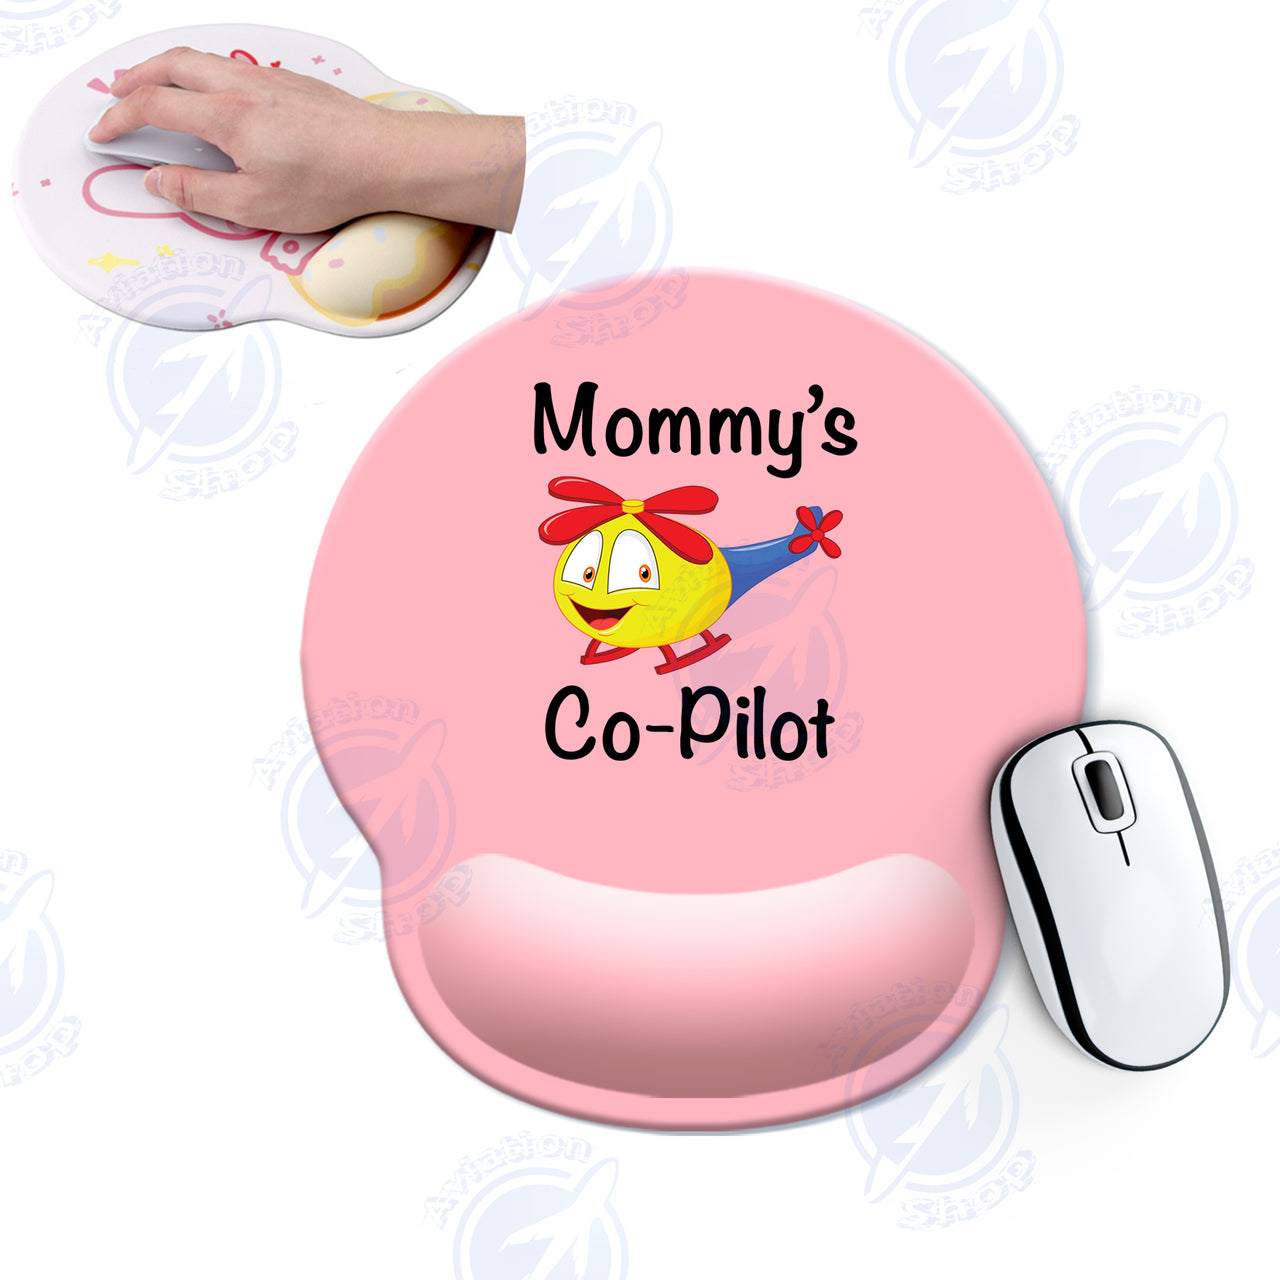 Mommy's Co-Pilot (Helicopter) Designed Ergonomic Mouse Pads